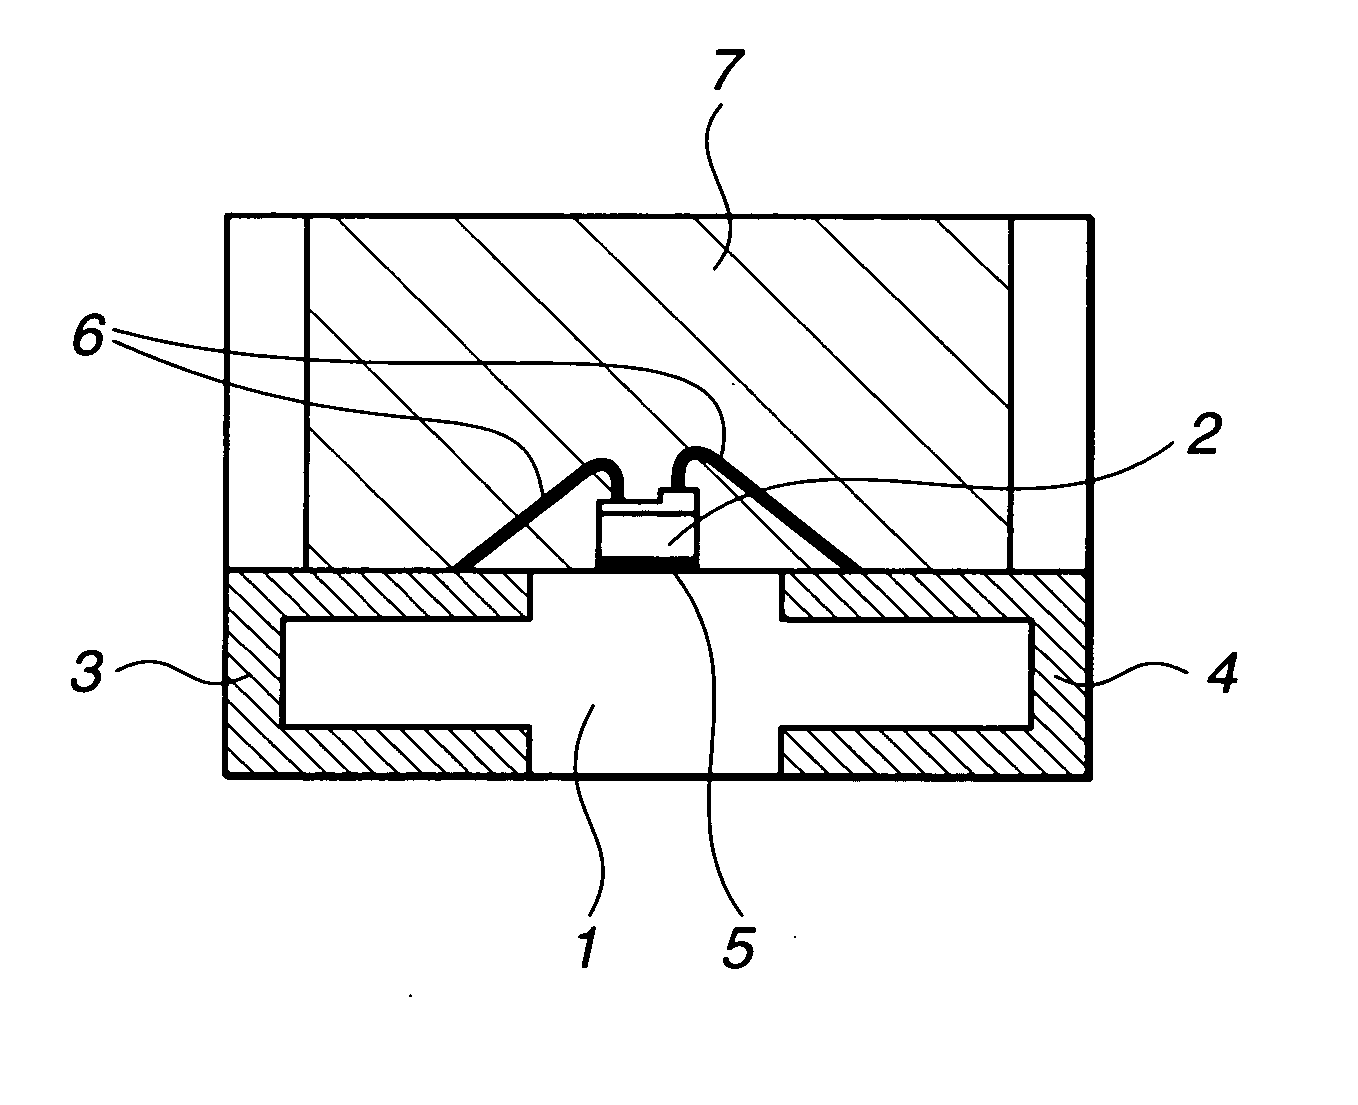 Preparation of semiconductor device